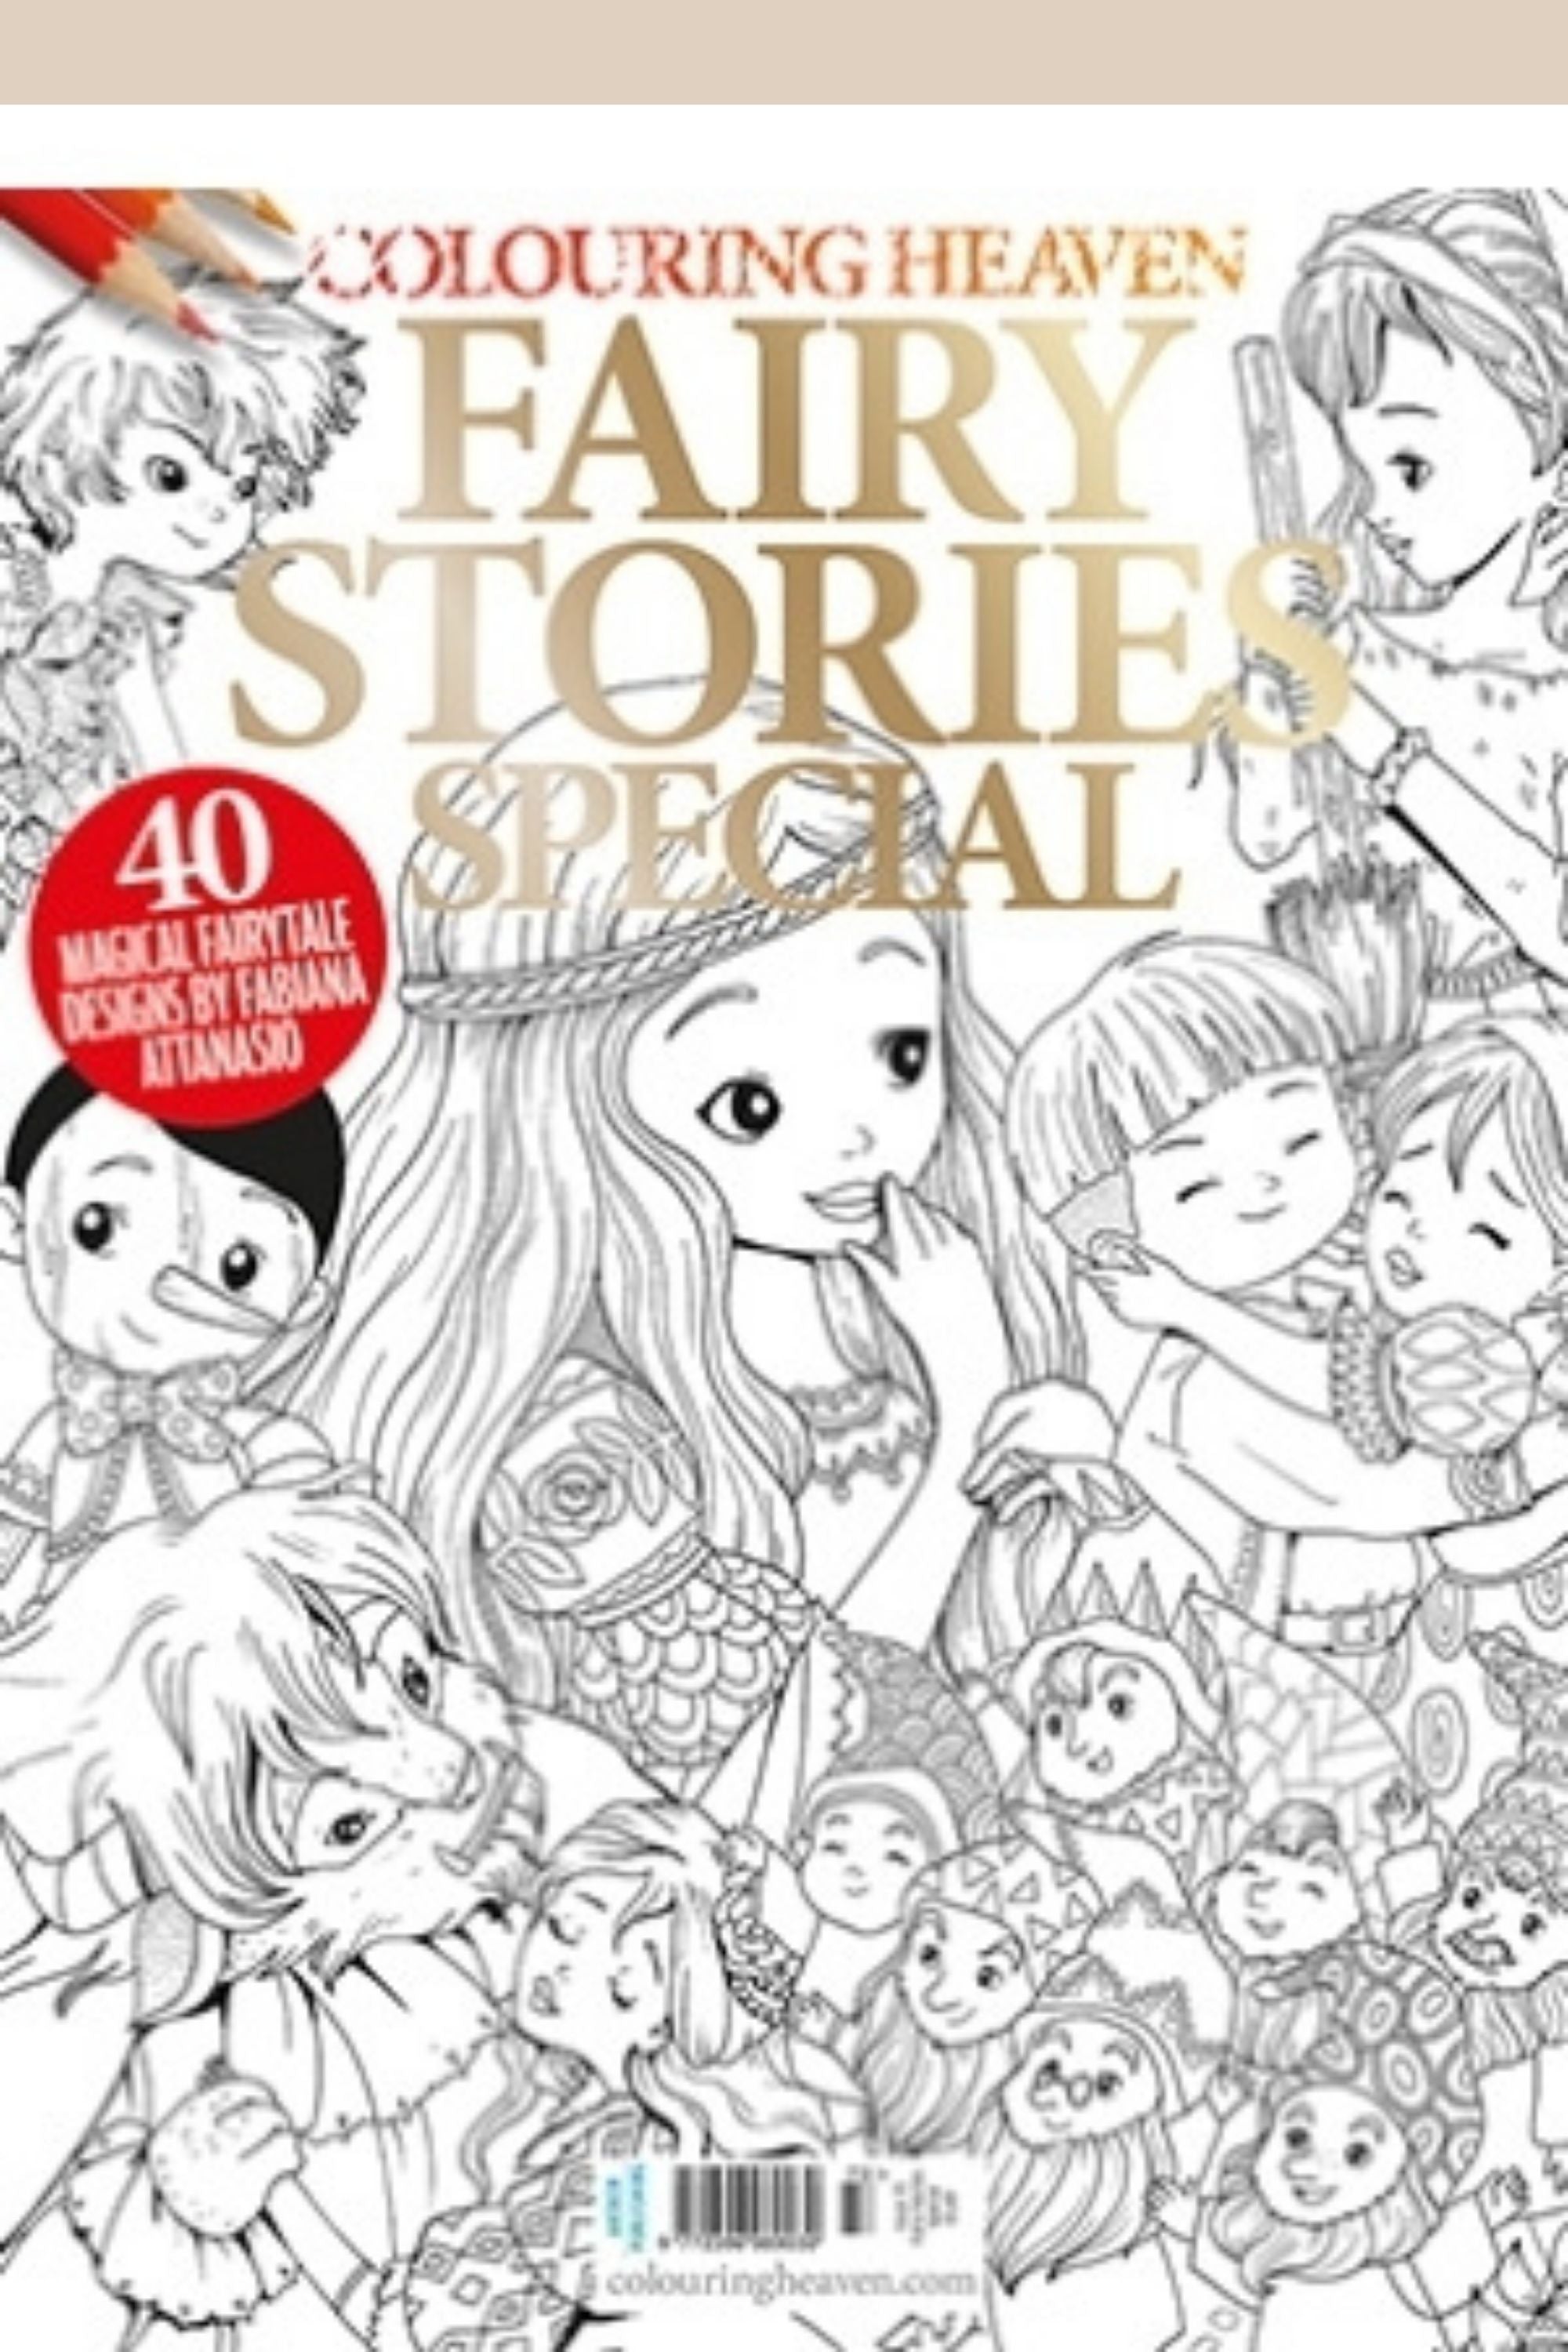 Colouring Heaven magazine Issue 73 Fairy Stories Special cover